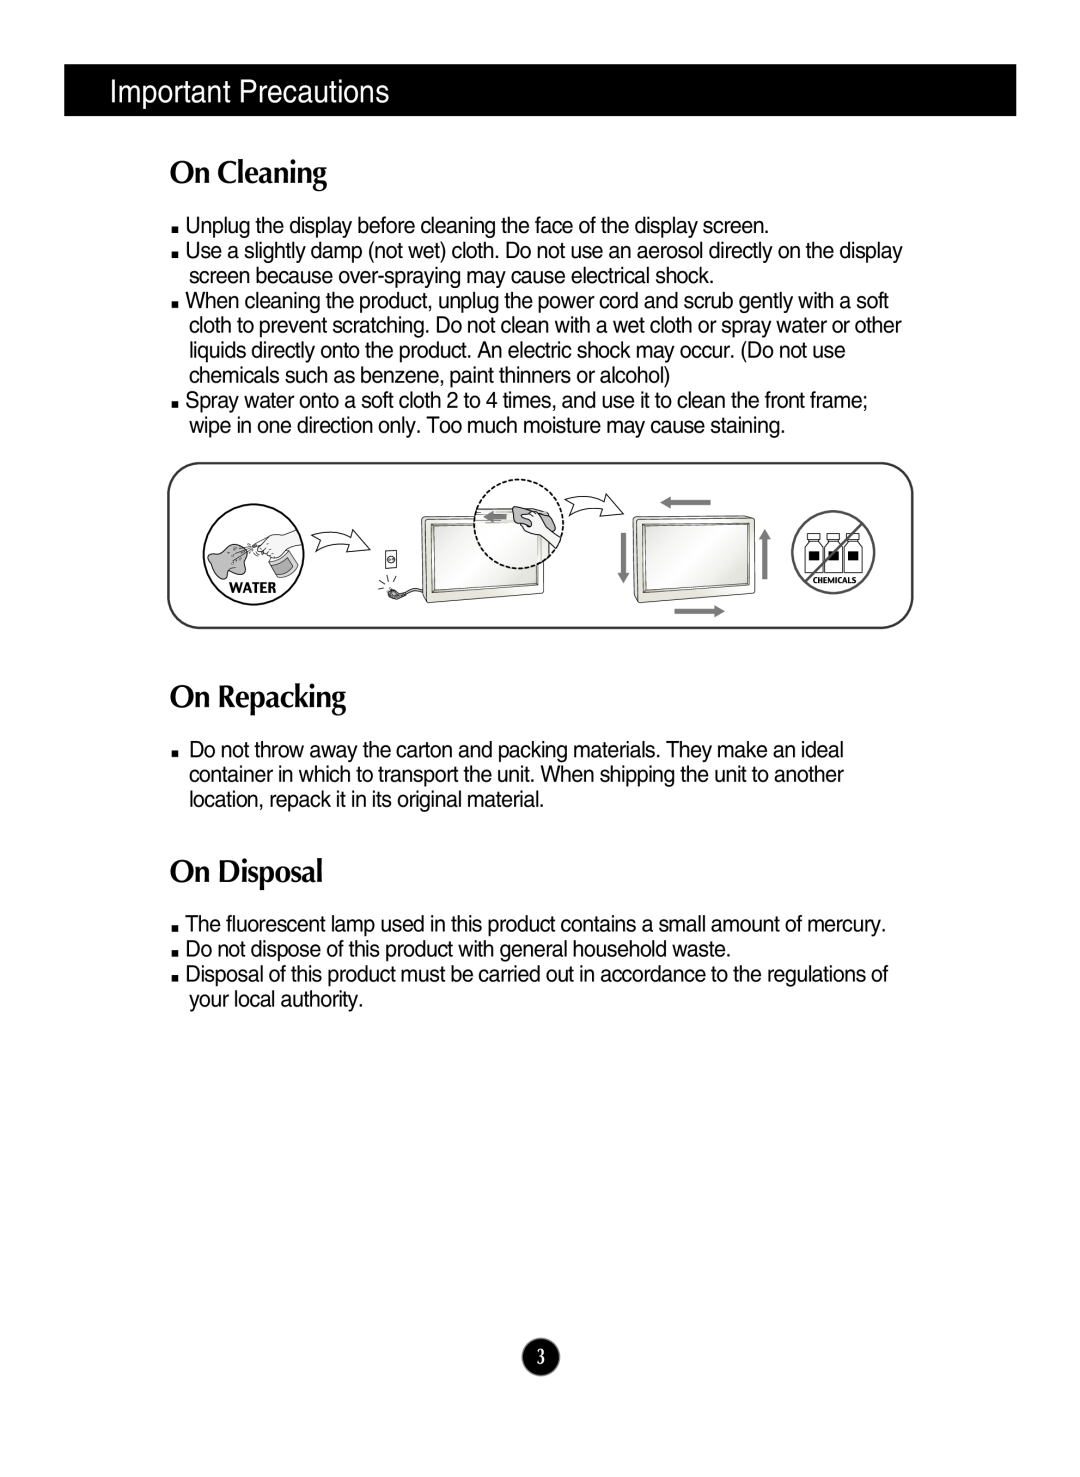 LG Electronics E2210PM, E1910PM owner manual On Cleaning, On Repacking, On Disposal, Important Precautions 